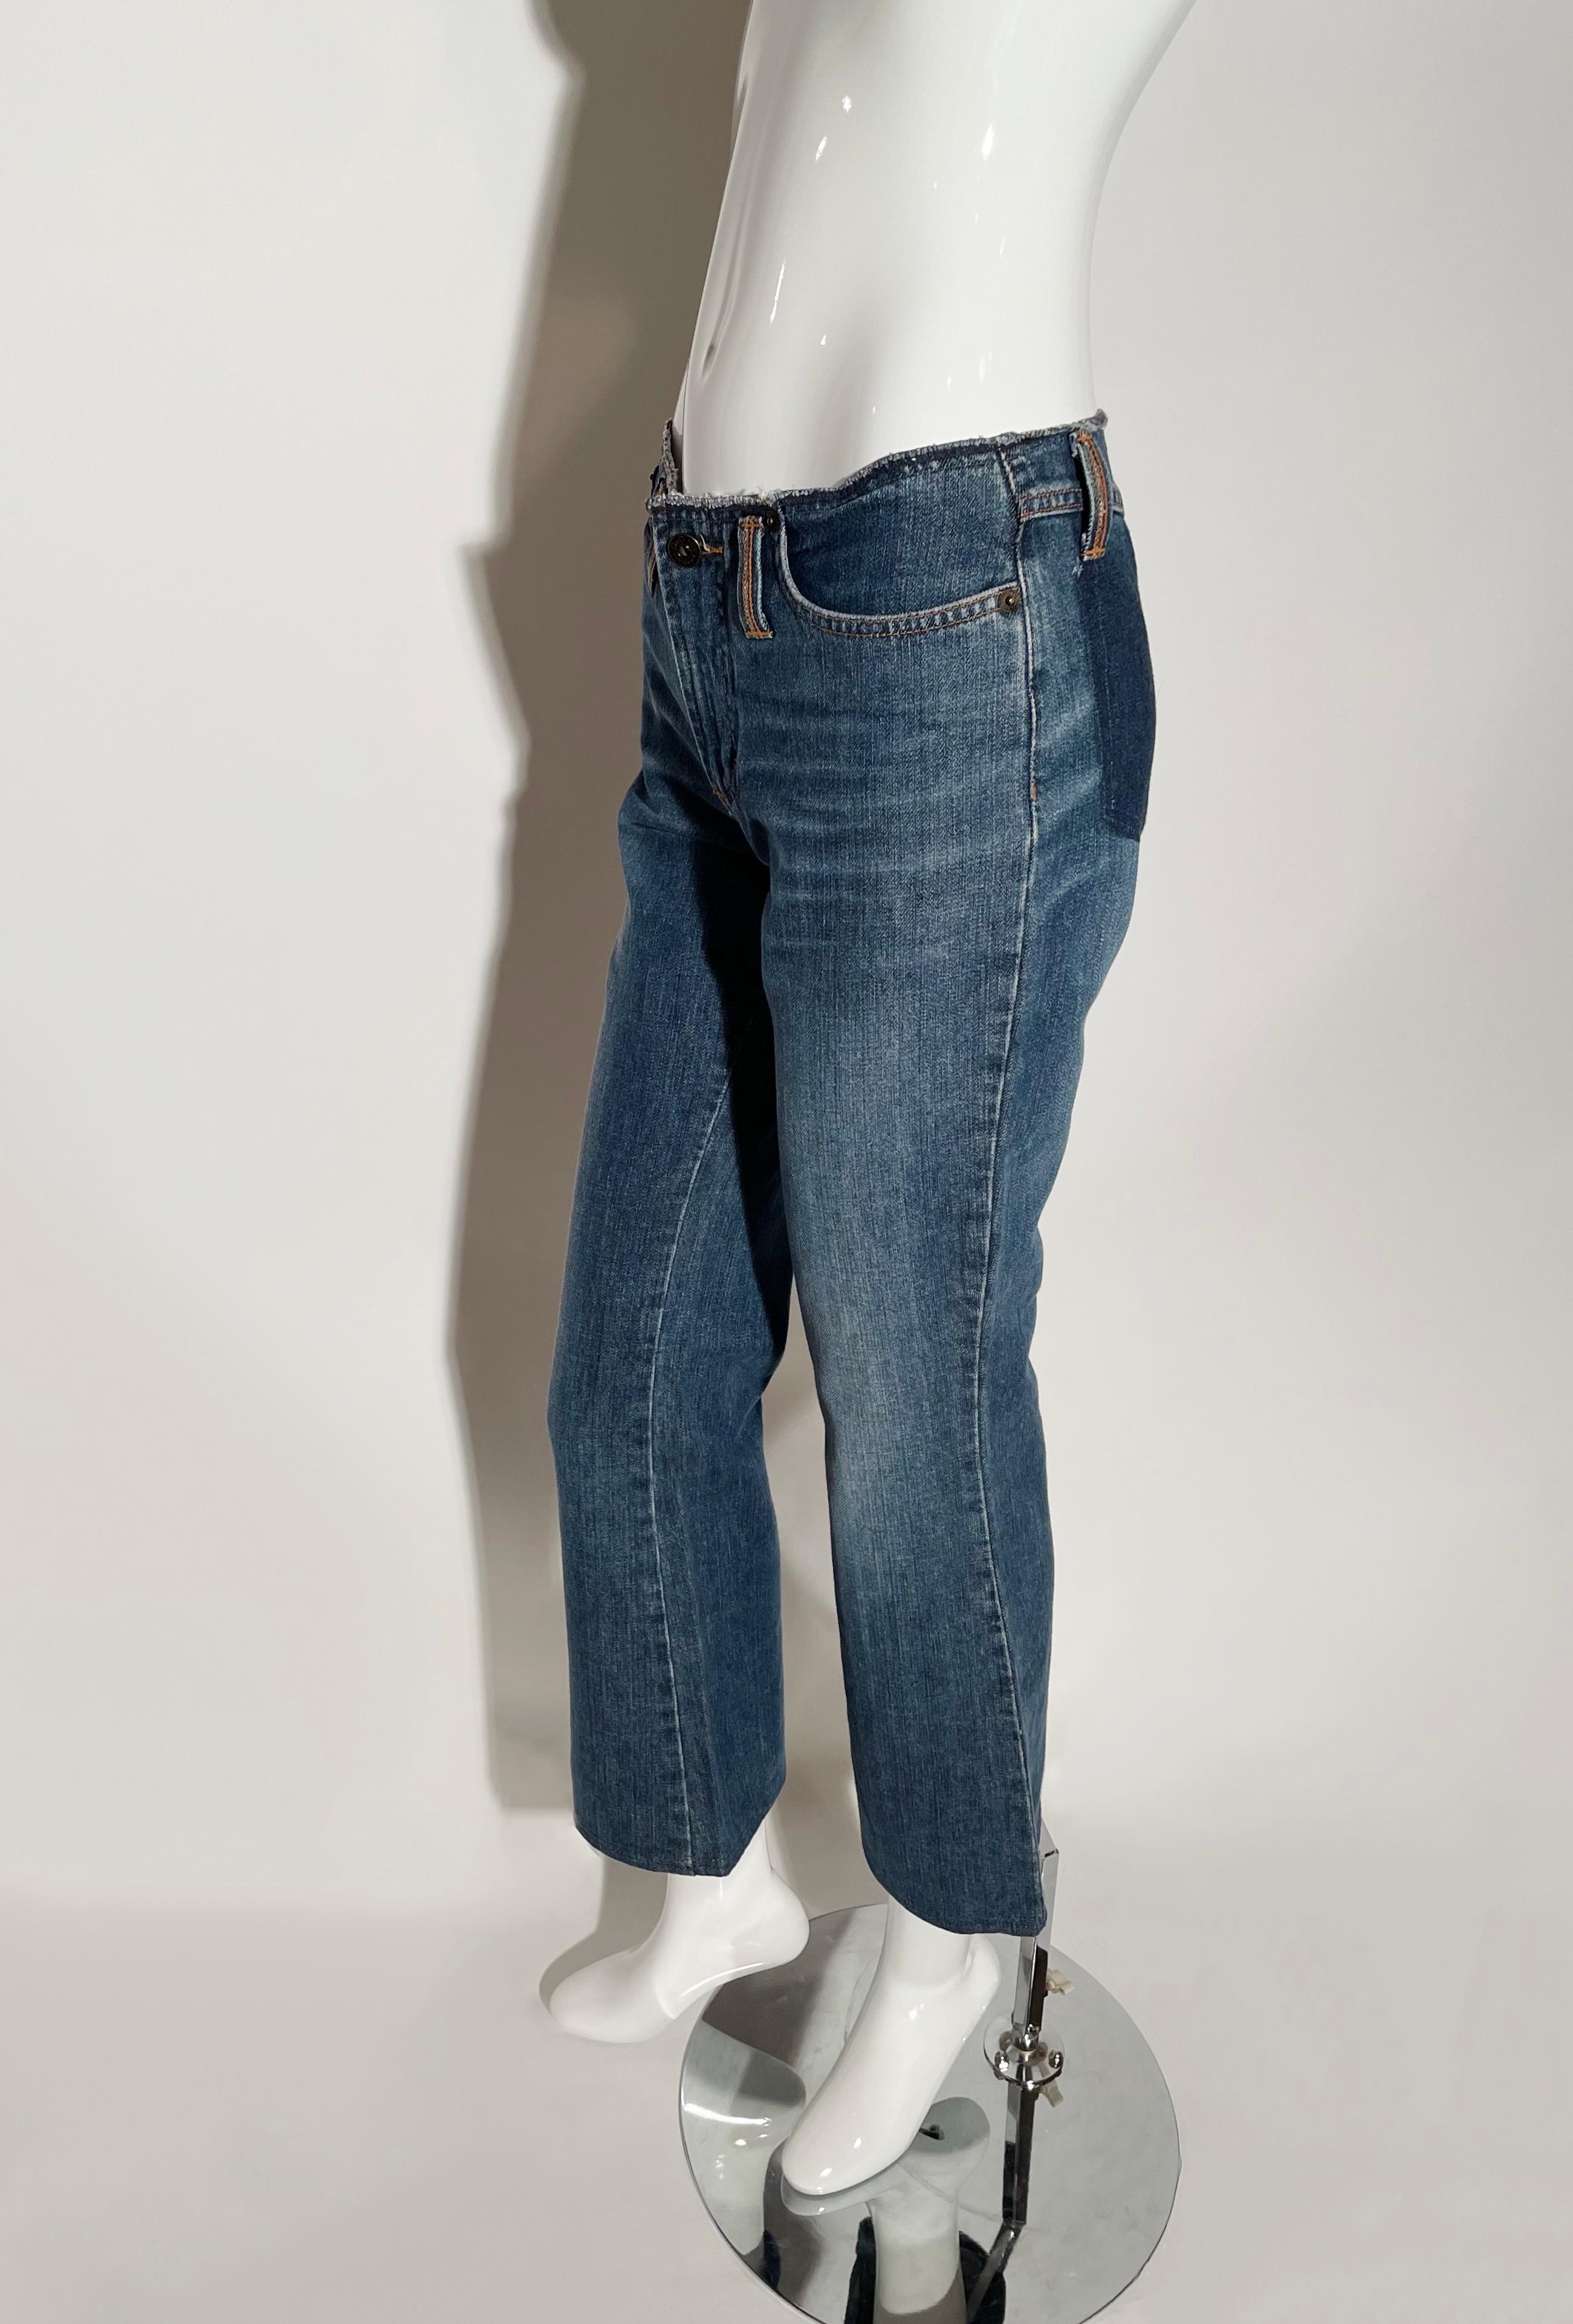 Dolce & Gabbana Low Rise Cropped Jeans  In Excellent Condition For Sale In Waterford, MI